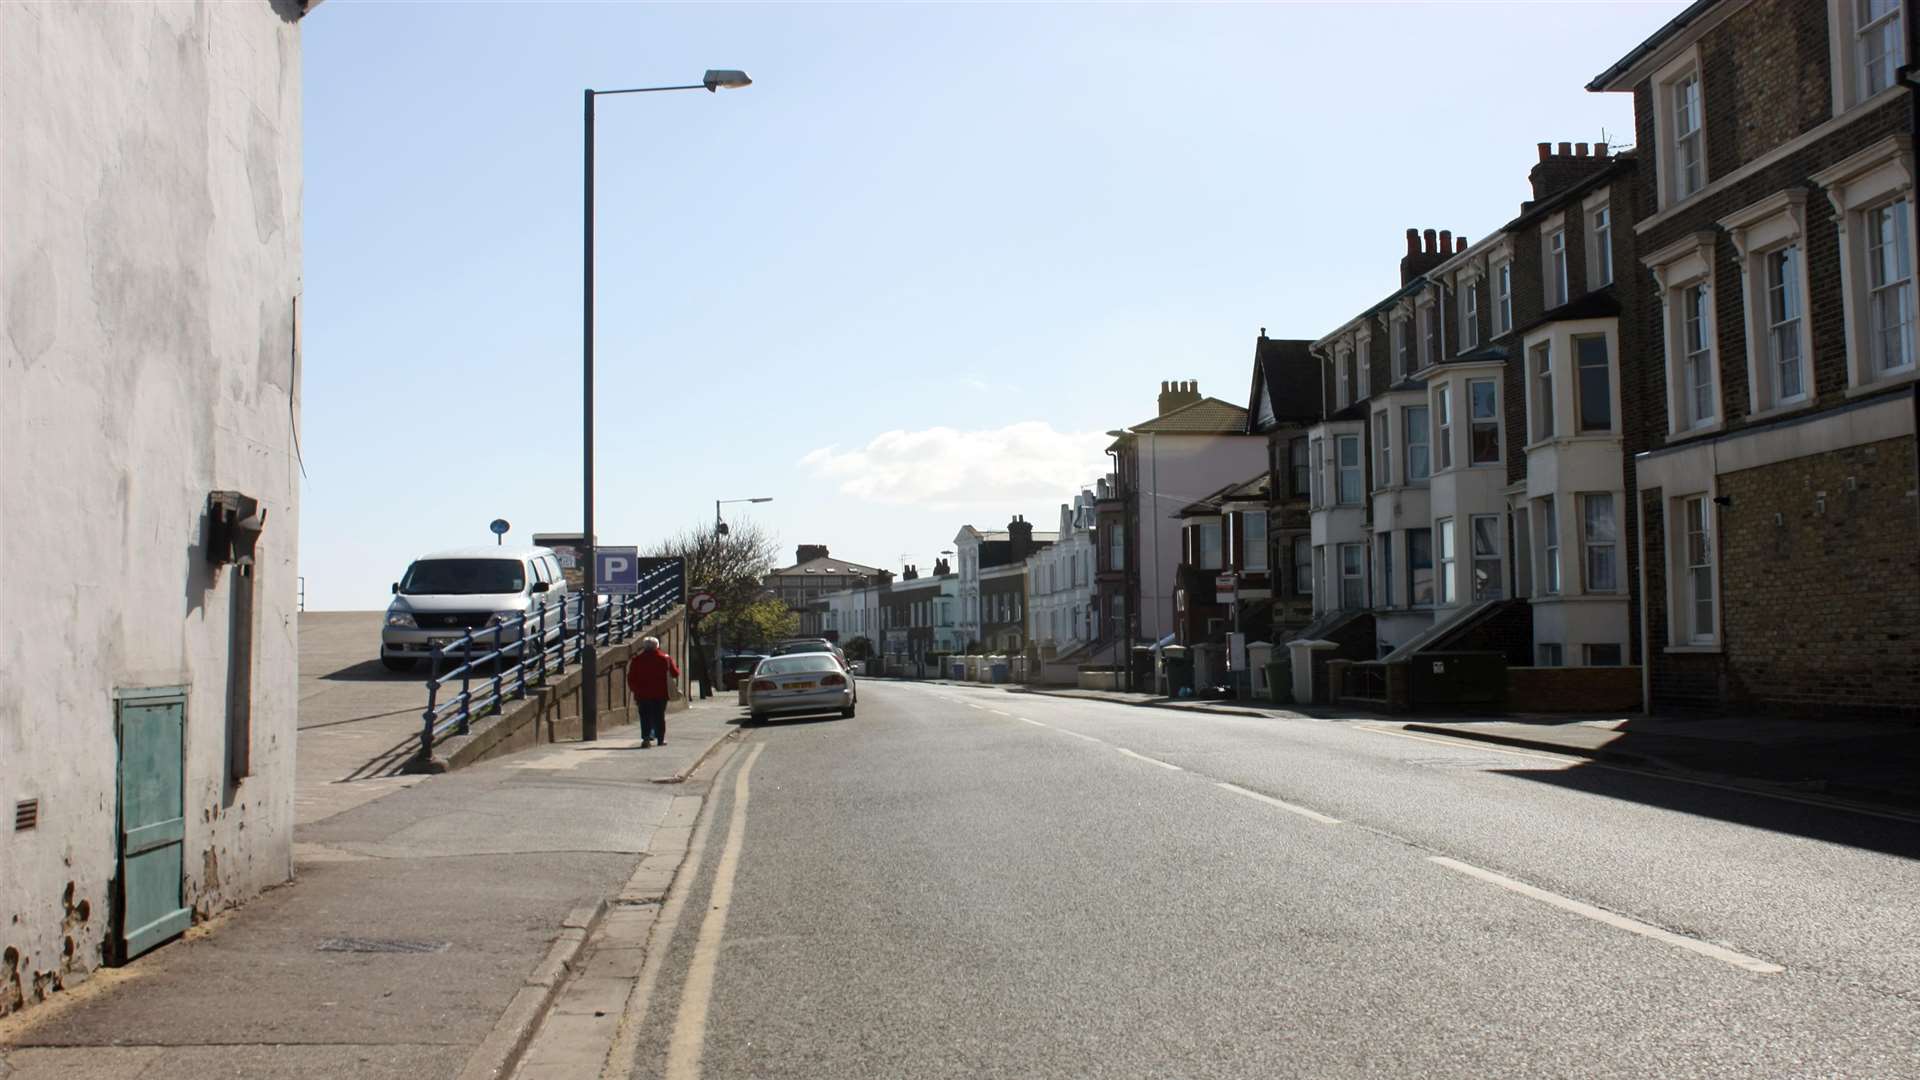 They were walking down Marine Parade, Sheerness, towards the High Street.